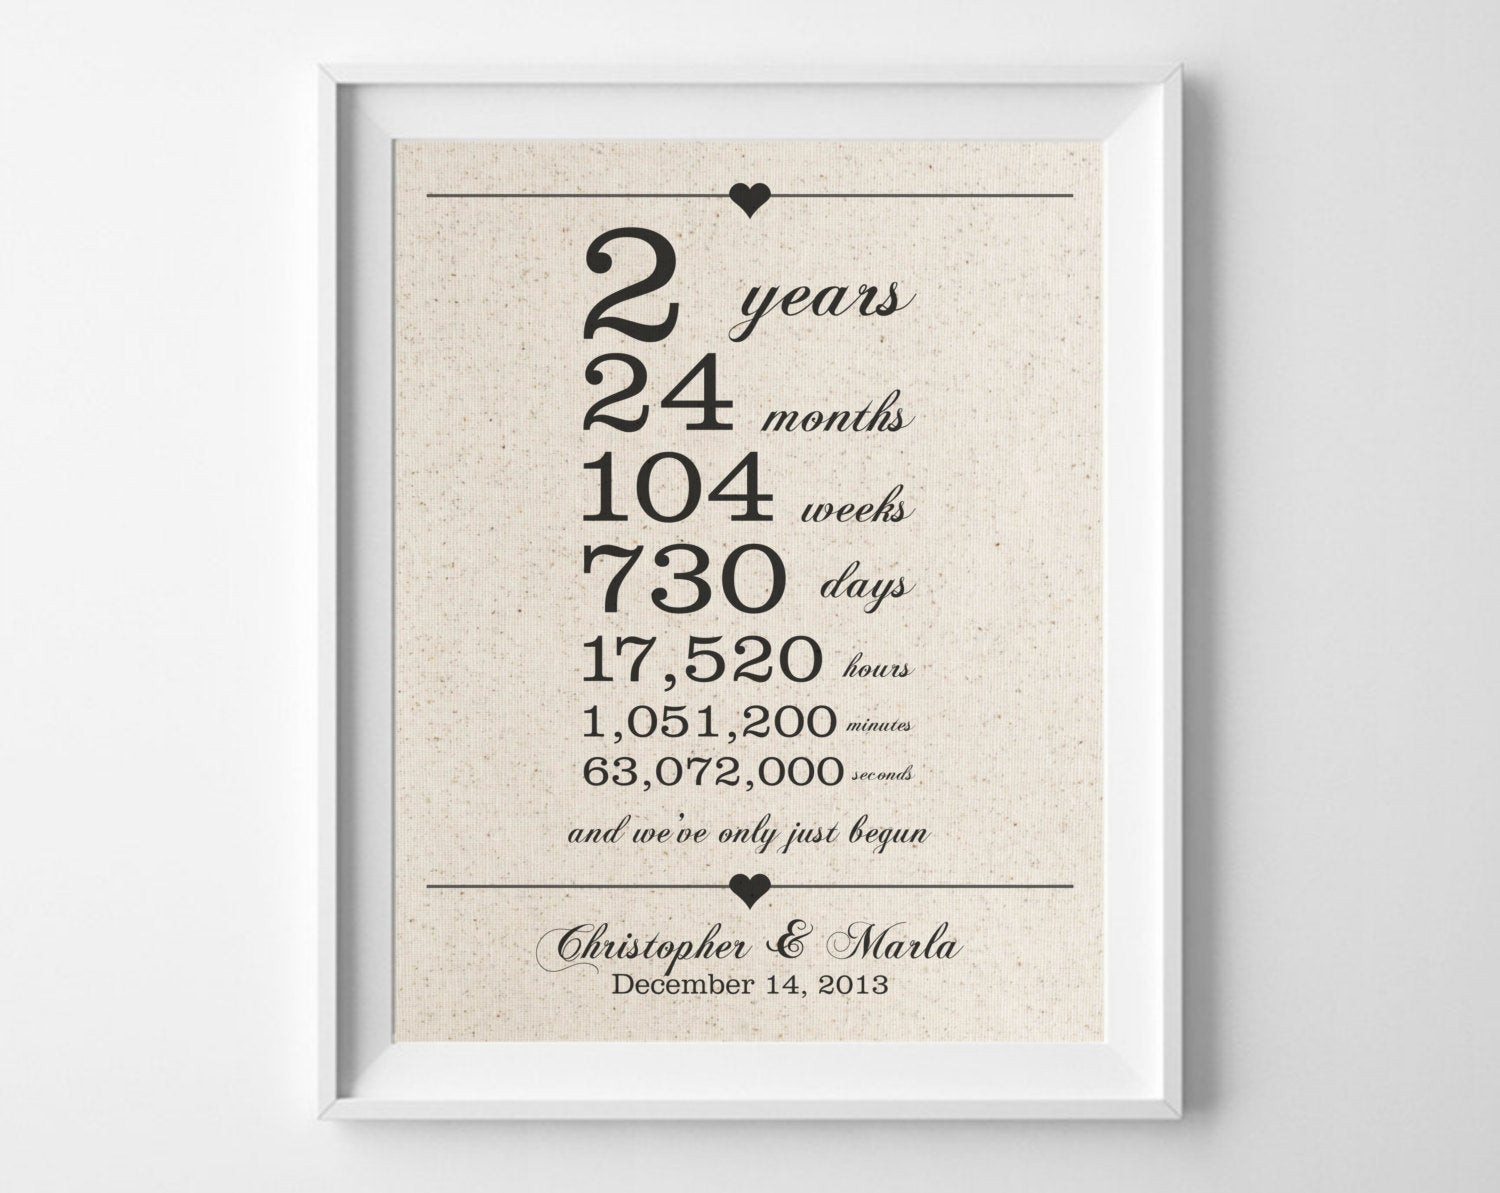 Second Anniversary Gift Ideas
 2 years to her Cotton Anniversary Print 2nd Anniversary